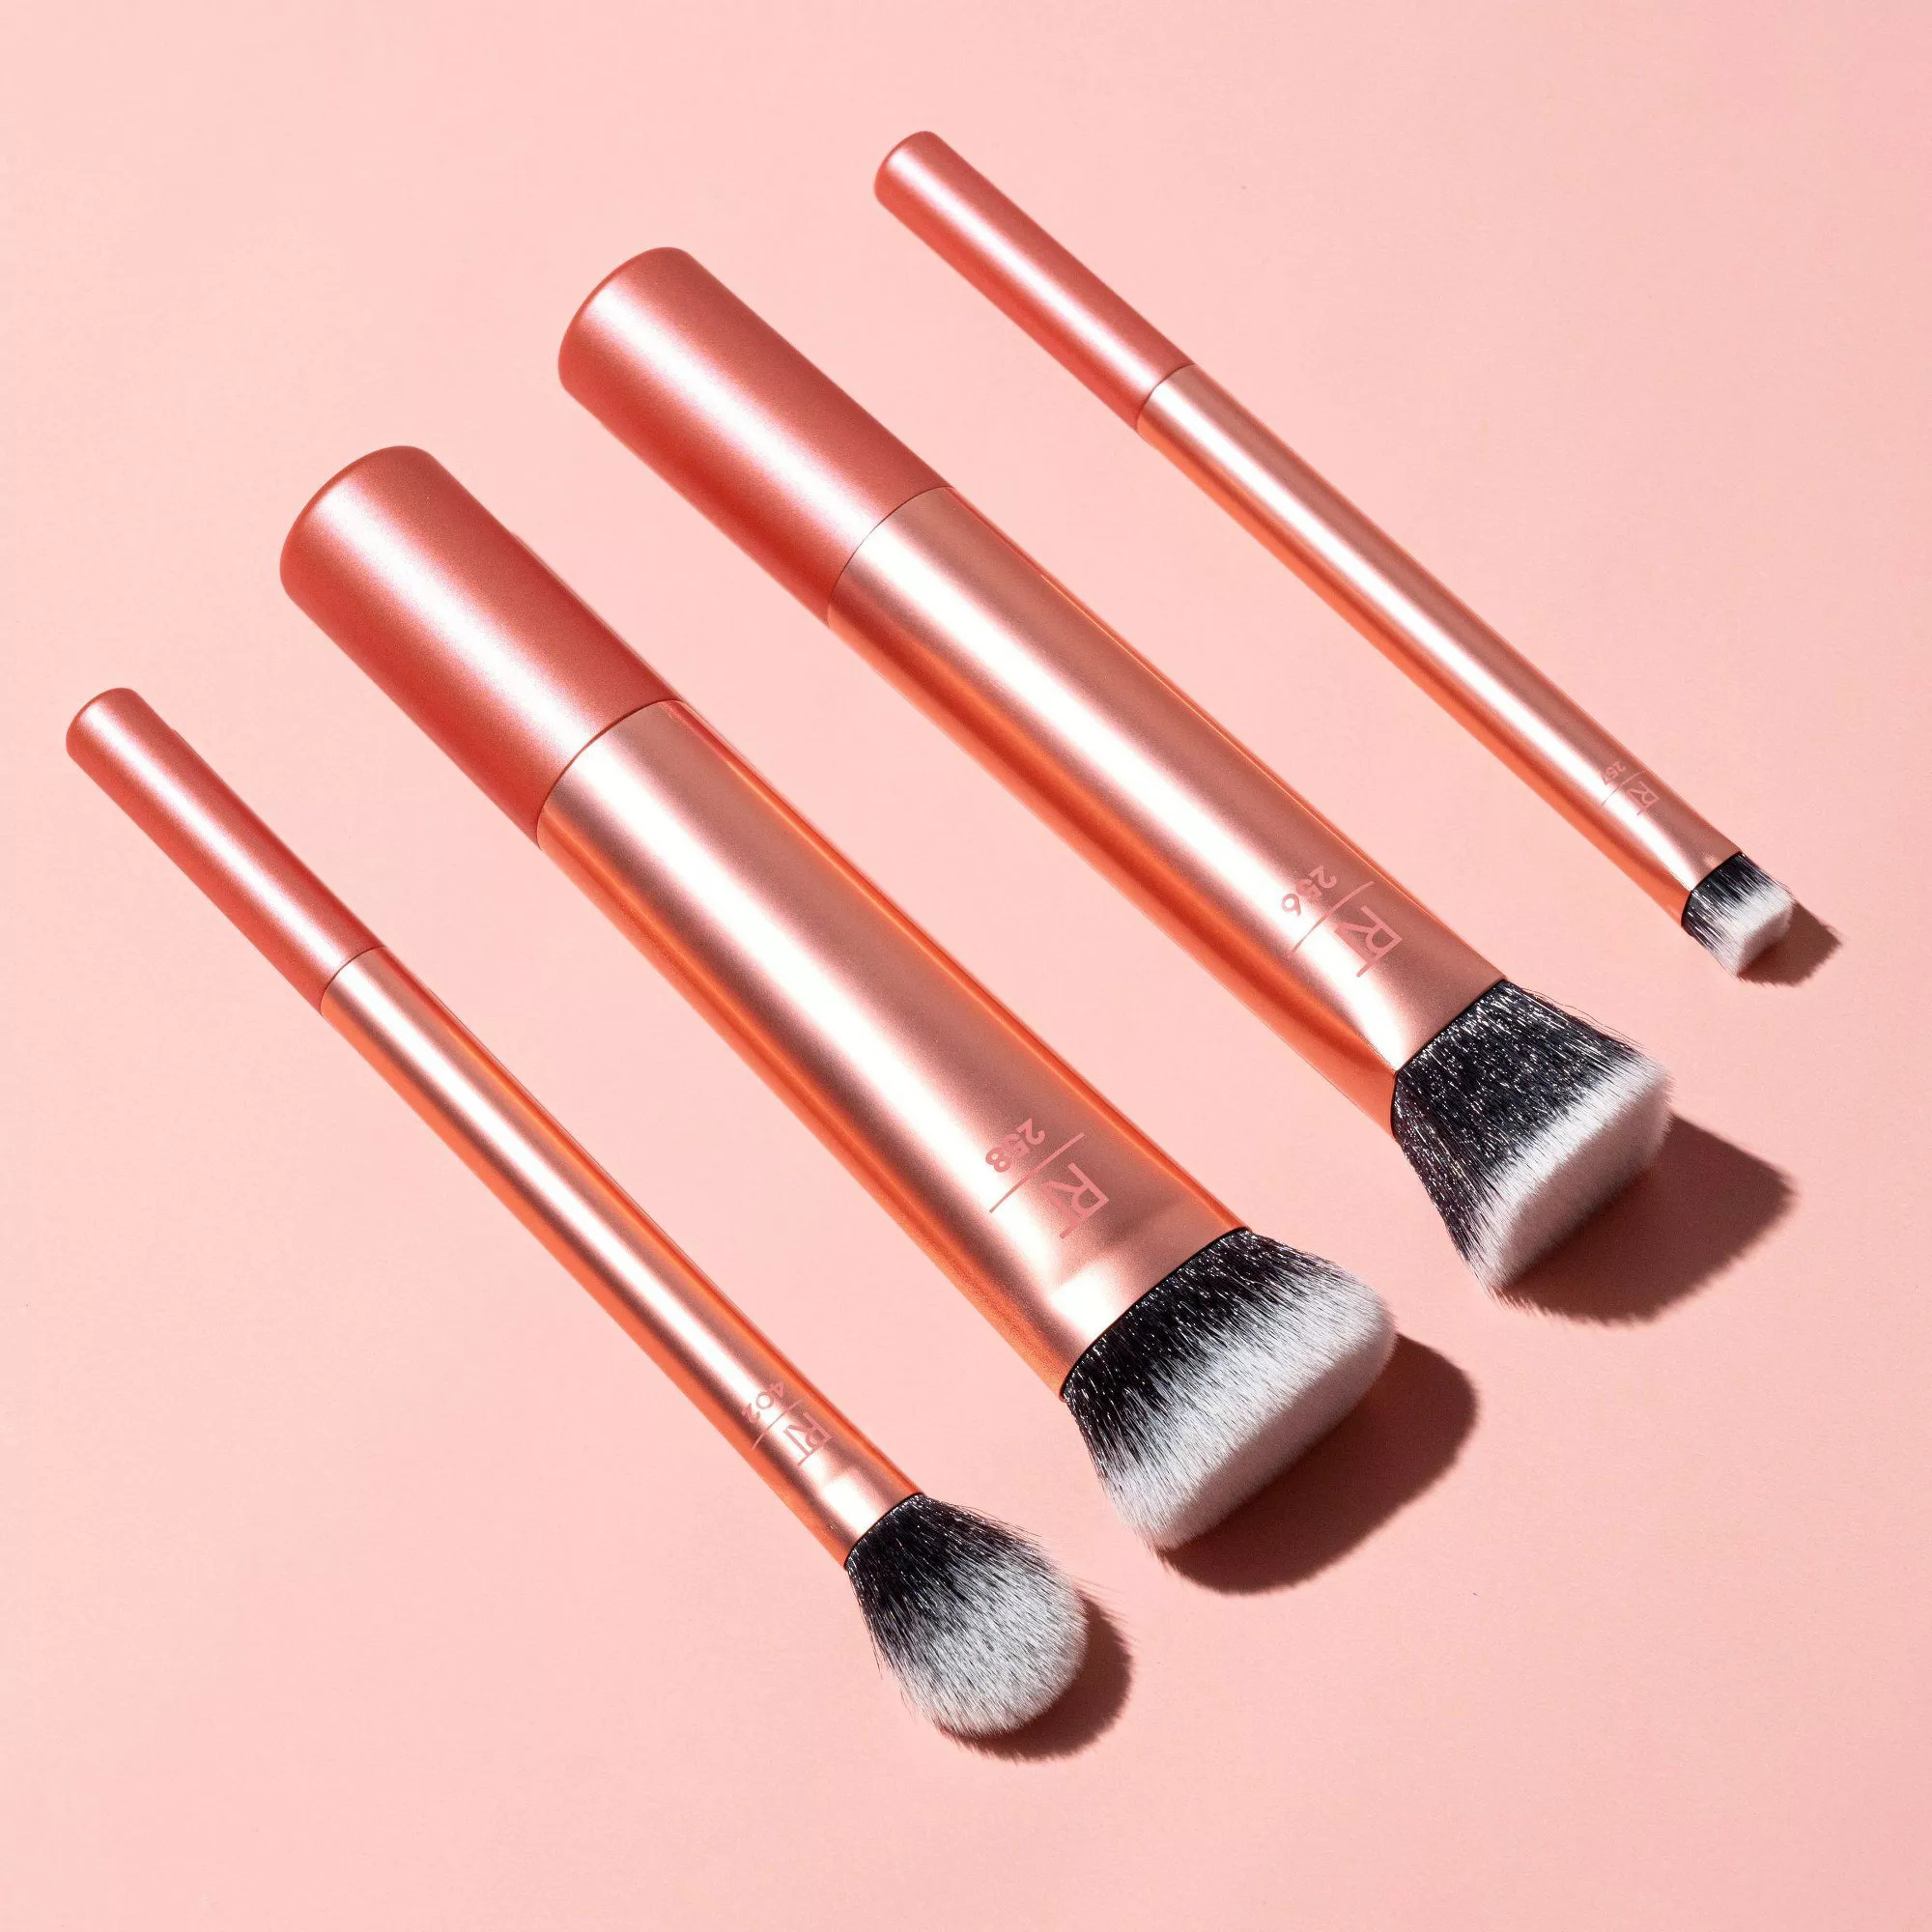 The brushes, with matte, metallic handles